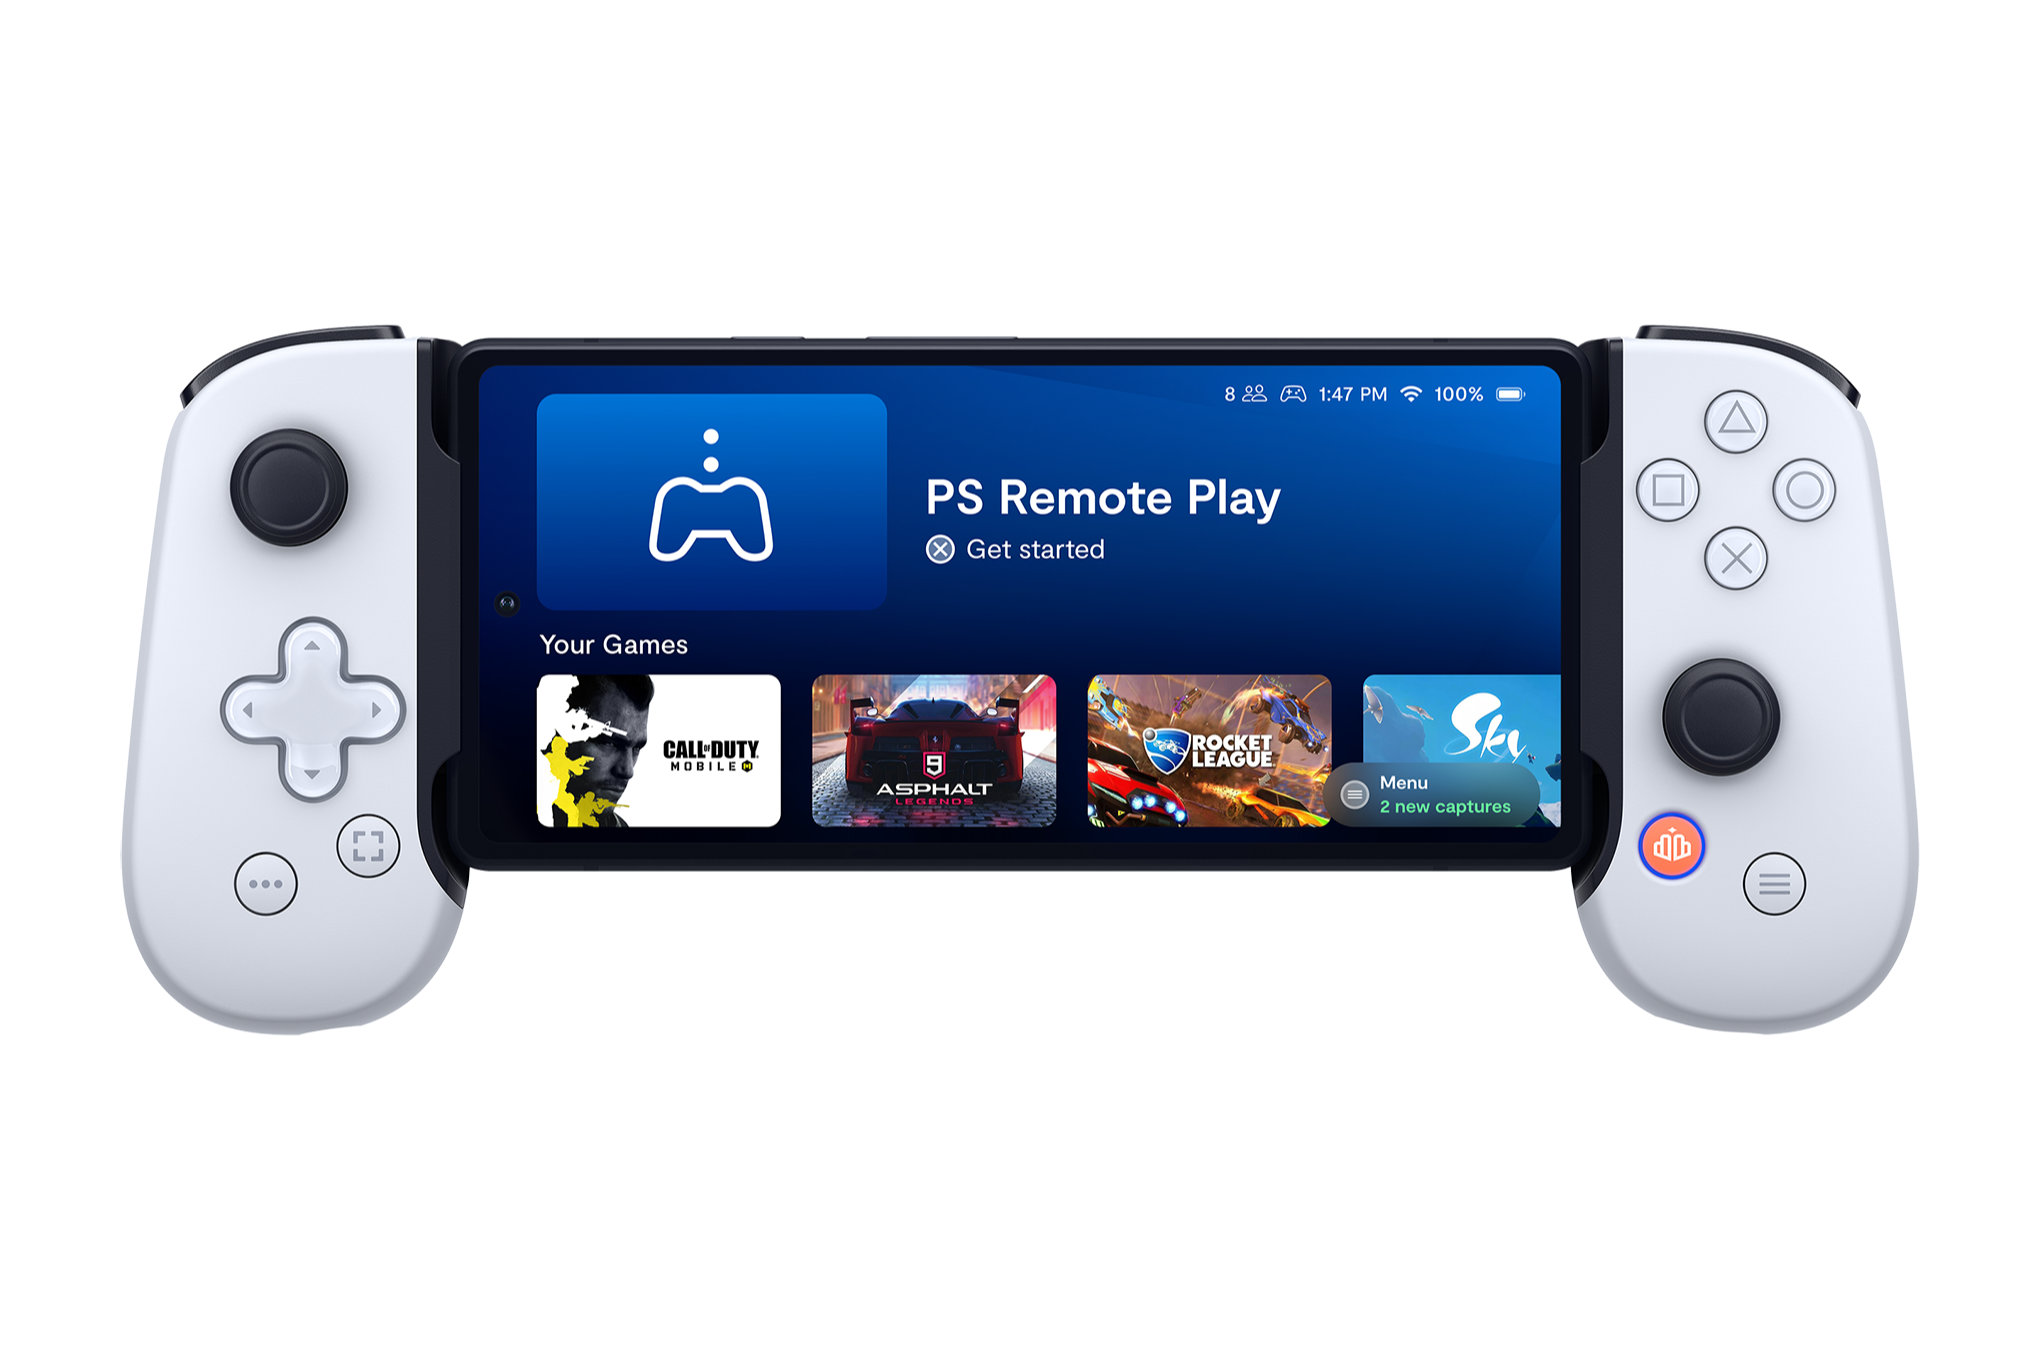 The Backbone PlayStation edition for Android. The controller is advertised spread open with a phone sitting in its middle. The phone’s screen shows a user interface that’s much like a console dashboard, filled with tiles of games and other interactive features, like videos and friends lists.